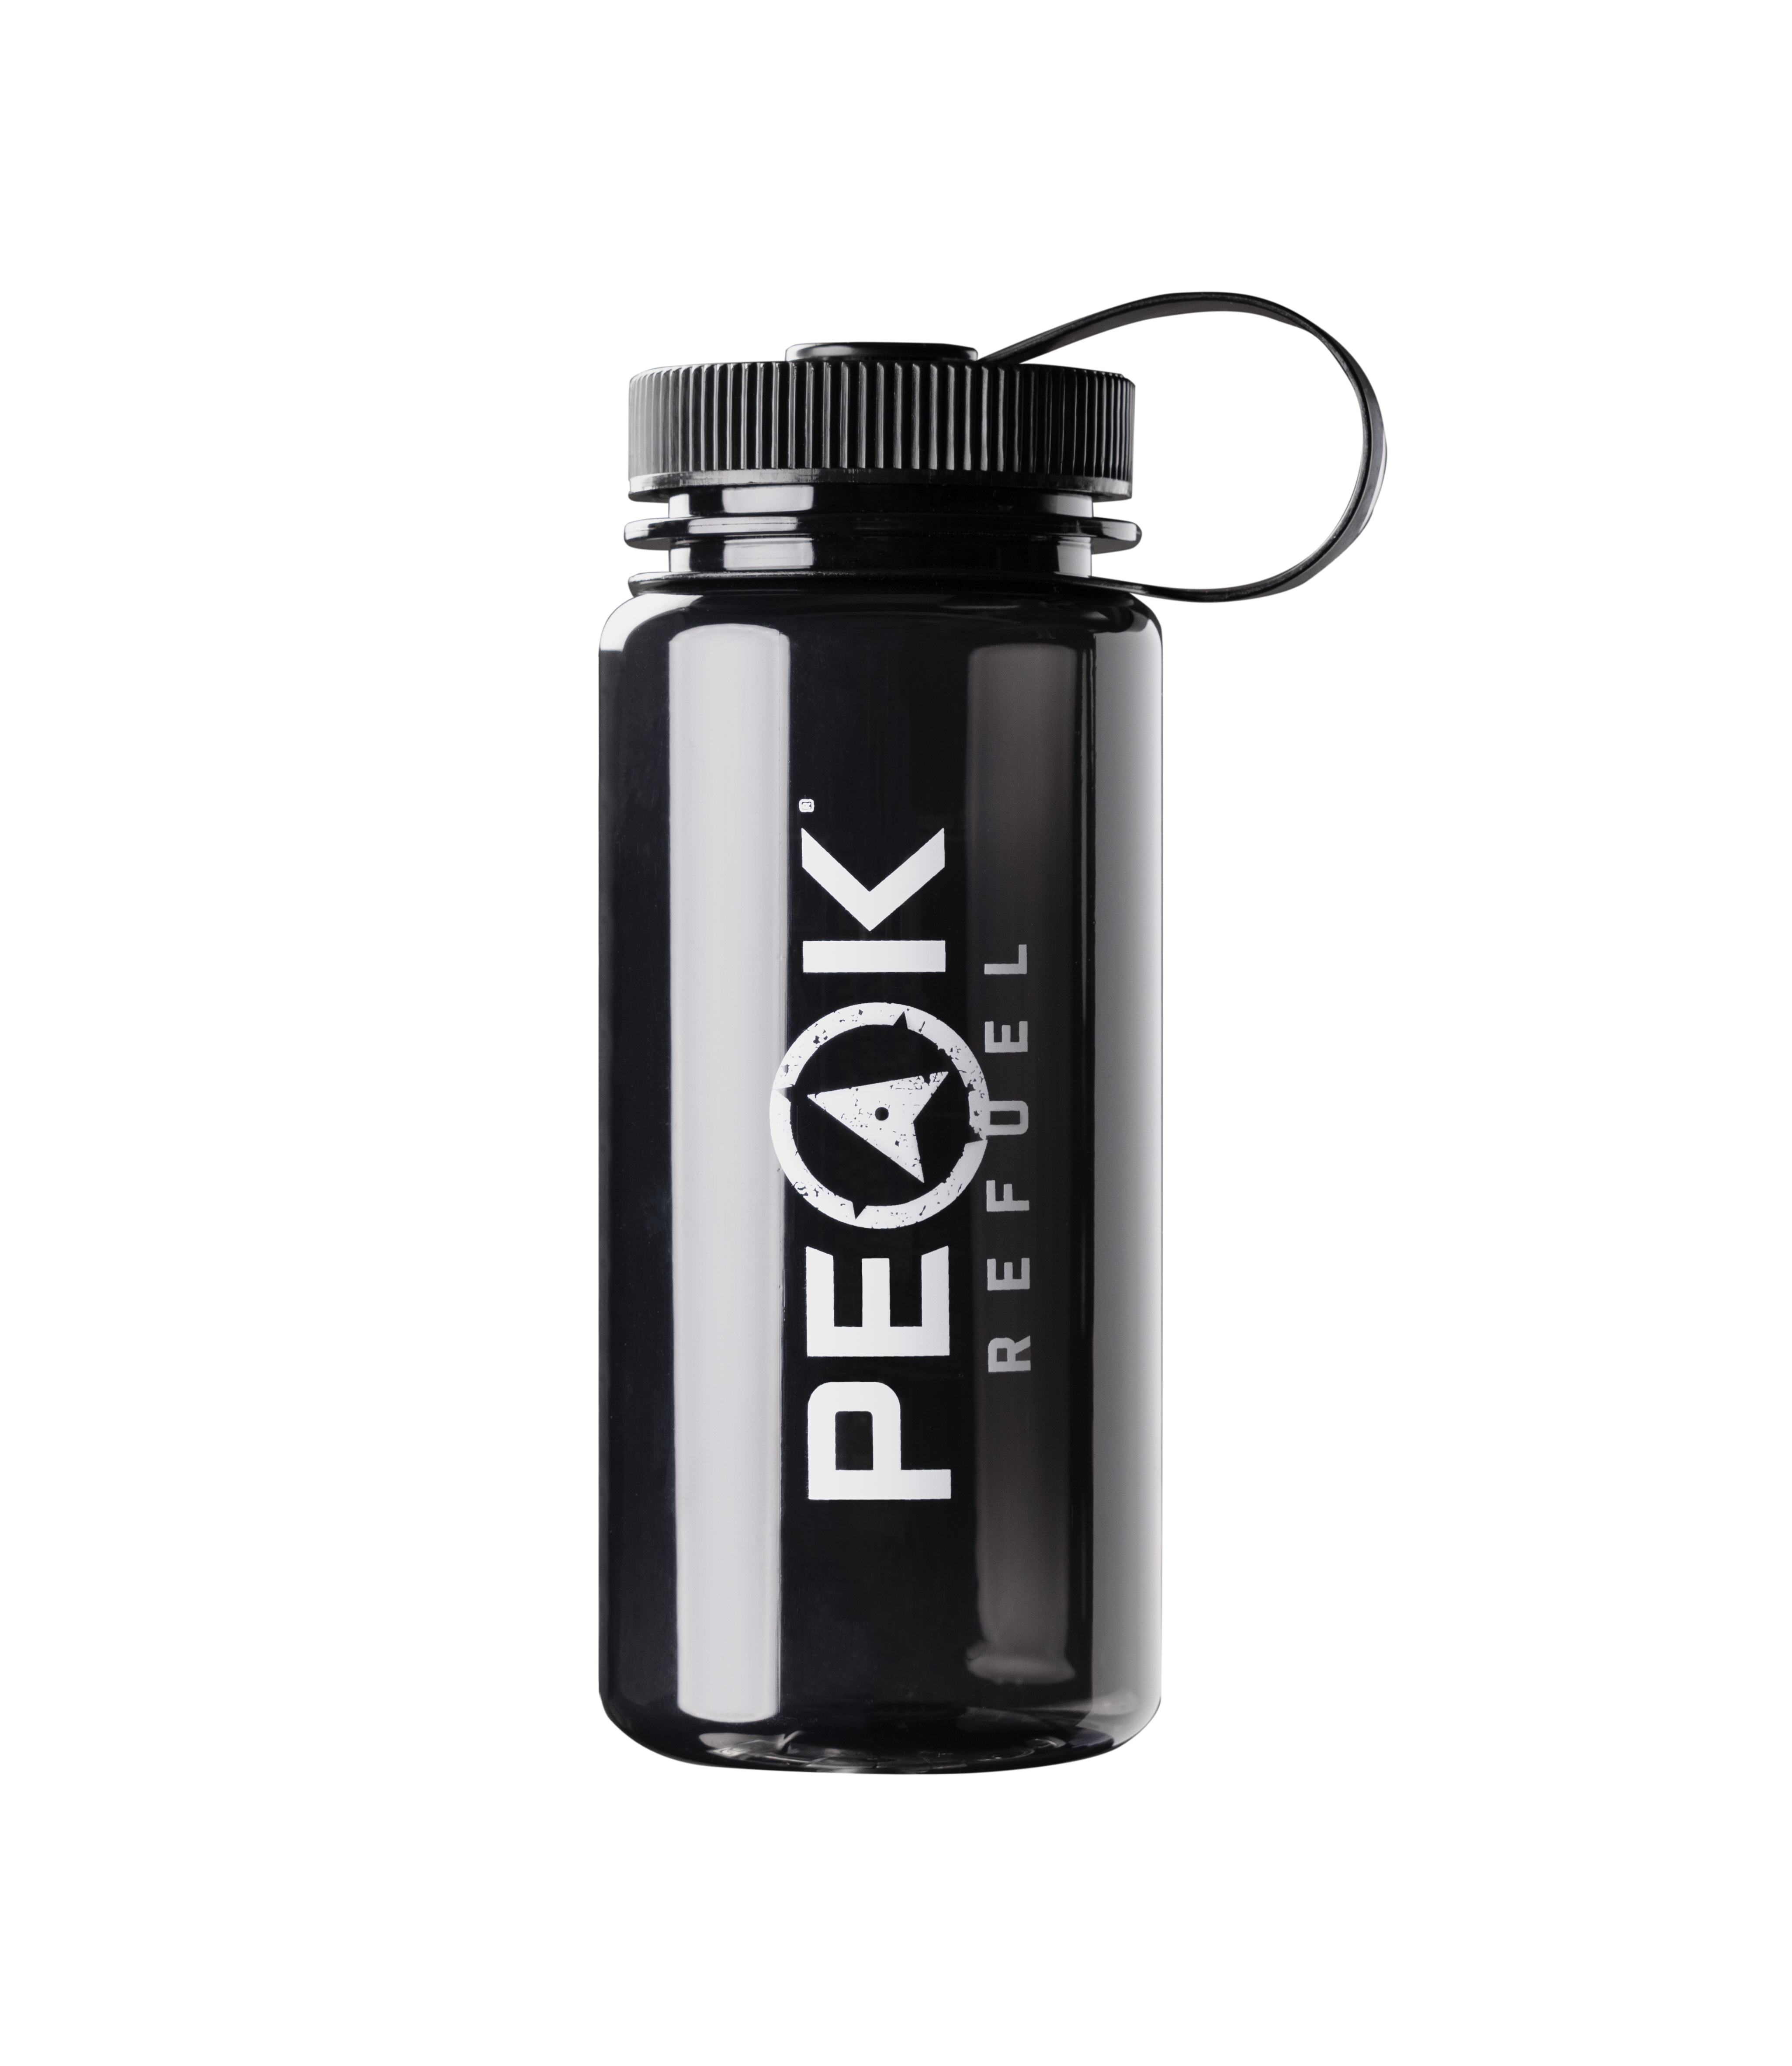 A black water bottle with a black cap, ideal for staying hydrated on the go.